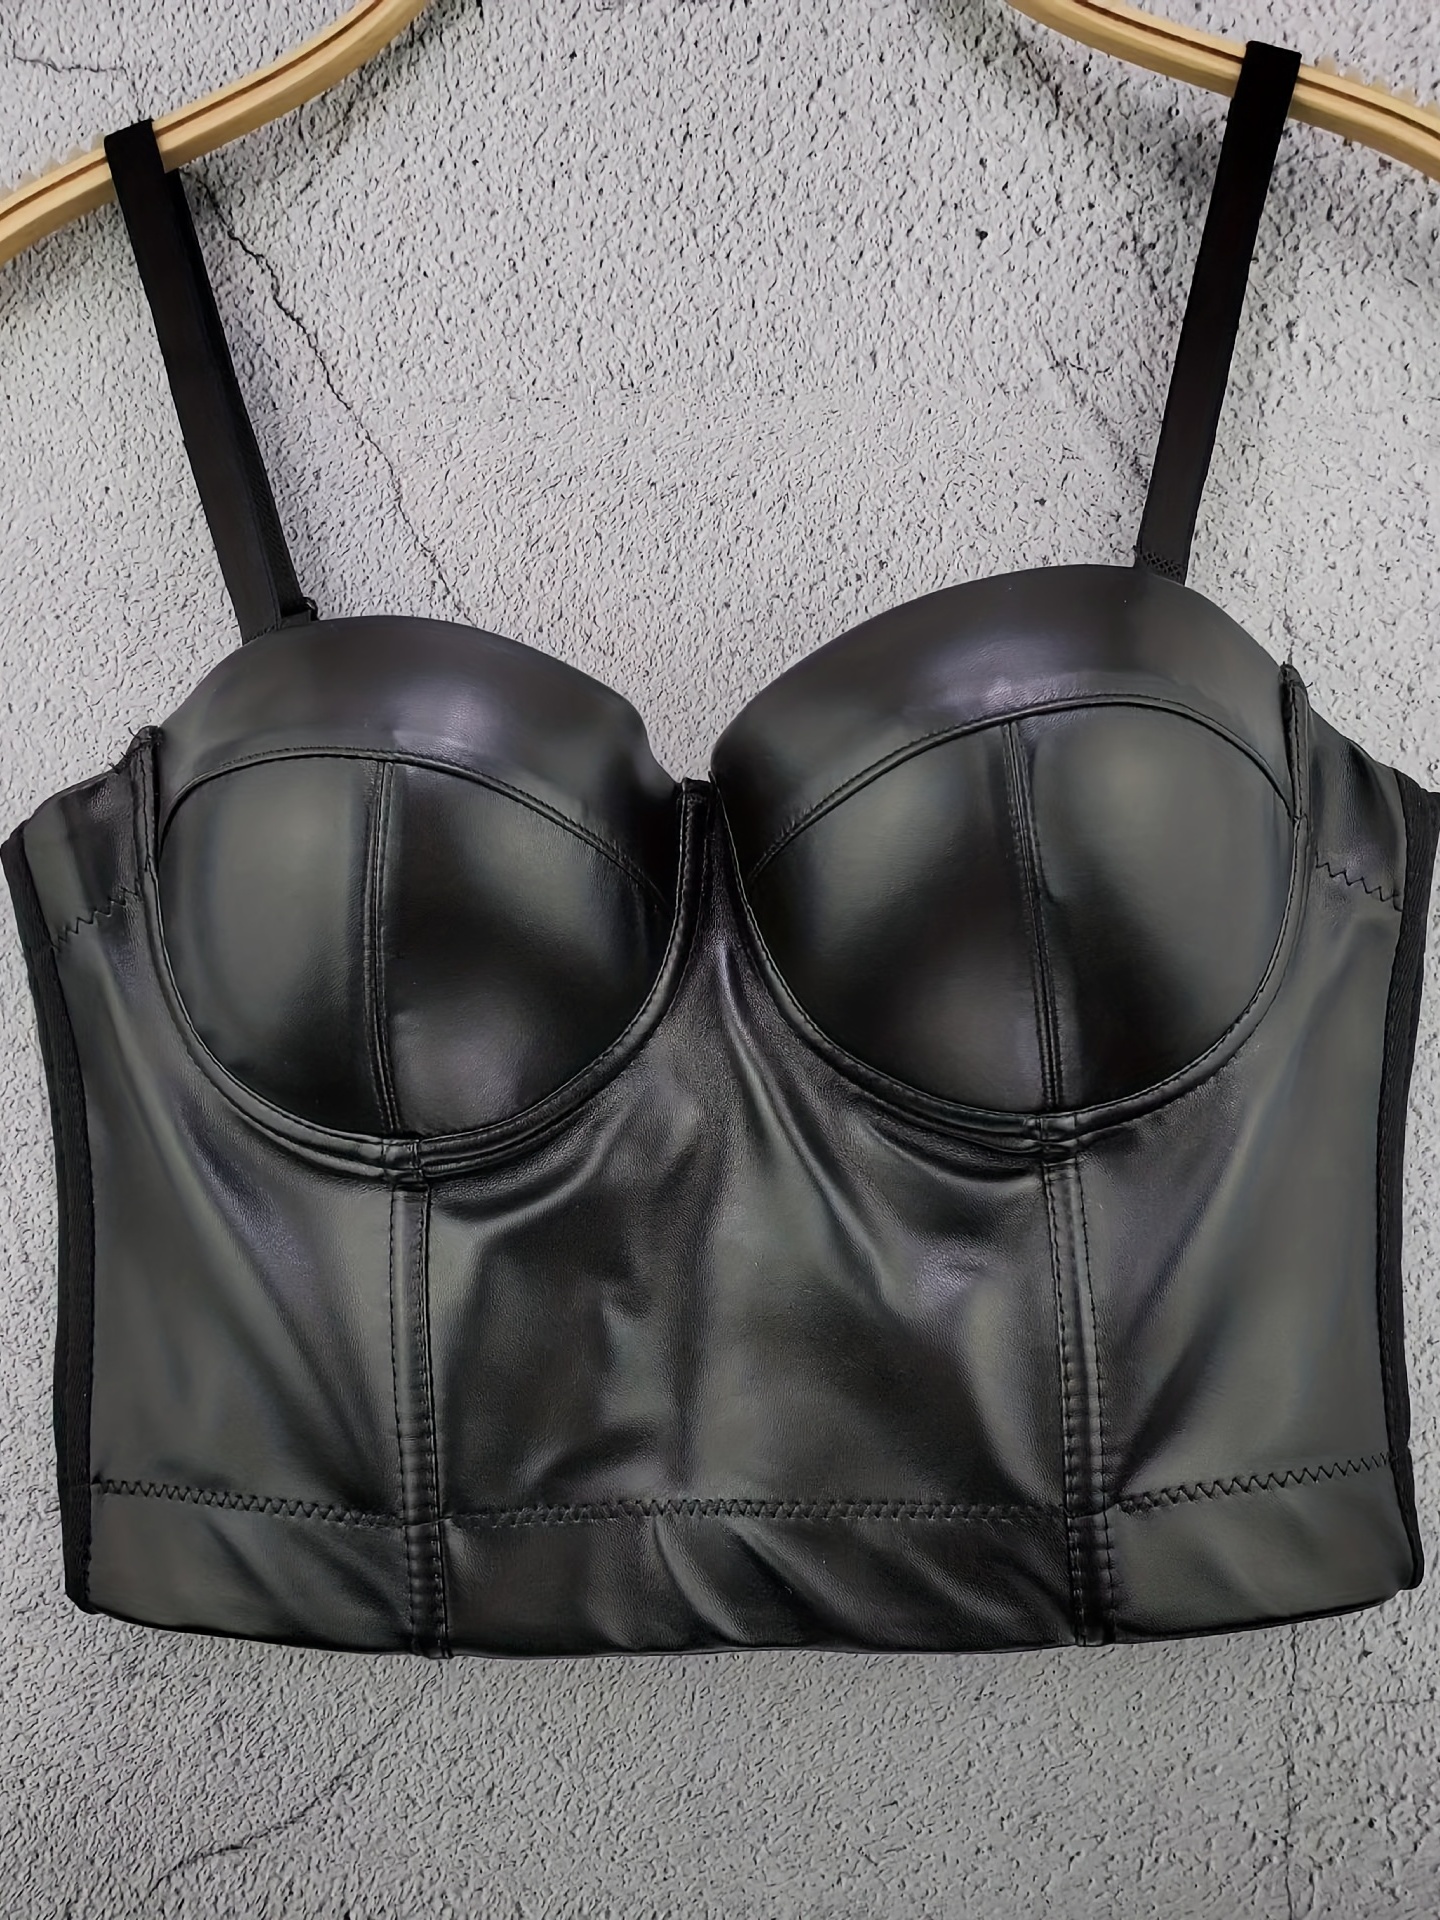 Intimates & Sleepwear  Black Faux Leather Pushup Bra Top With